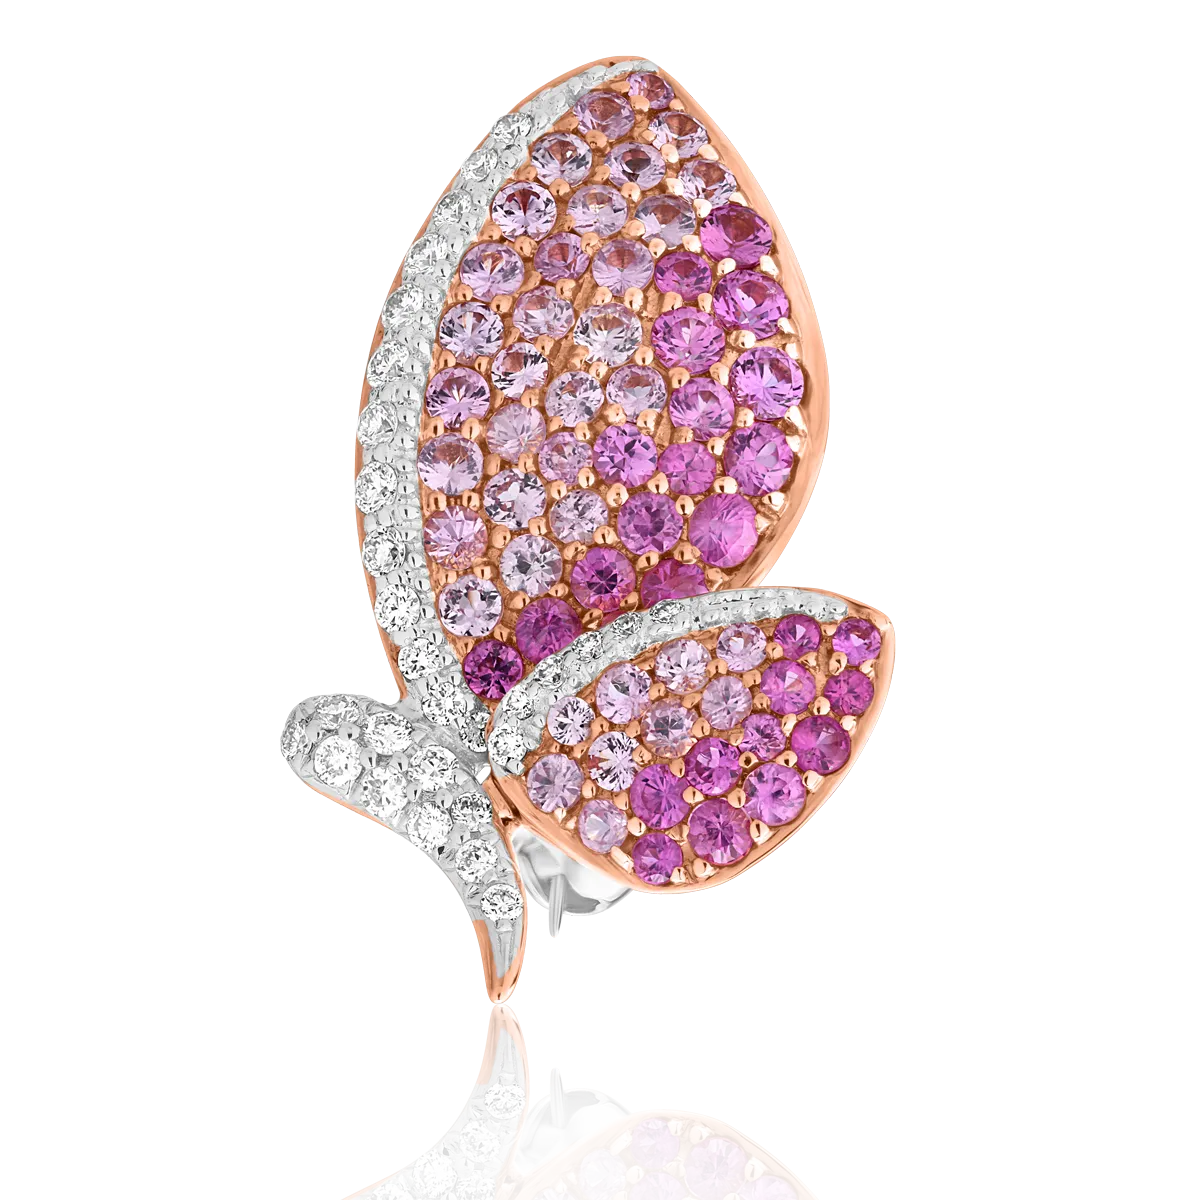 18K rose gold brooch with 1.43ct pink sapphire and 0.21ct diamonds